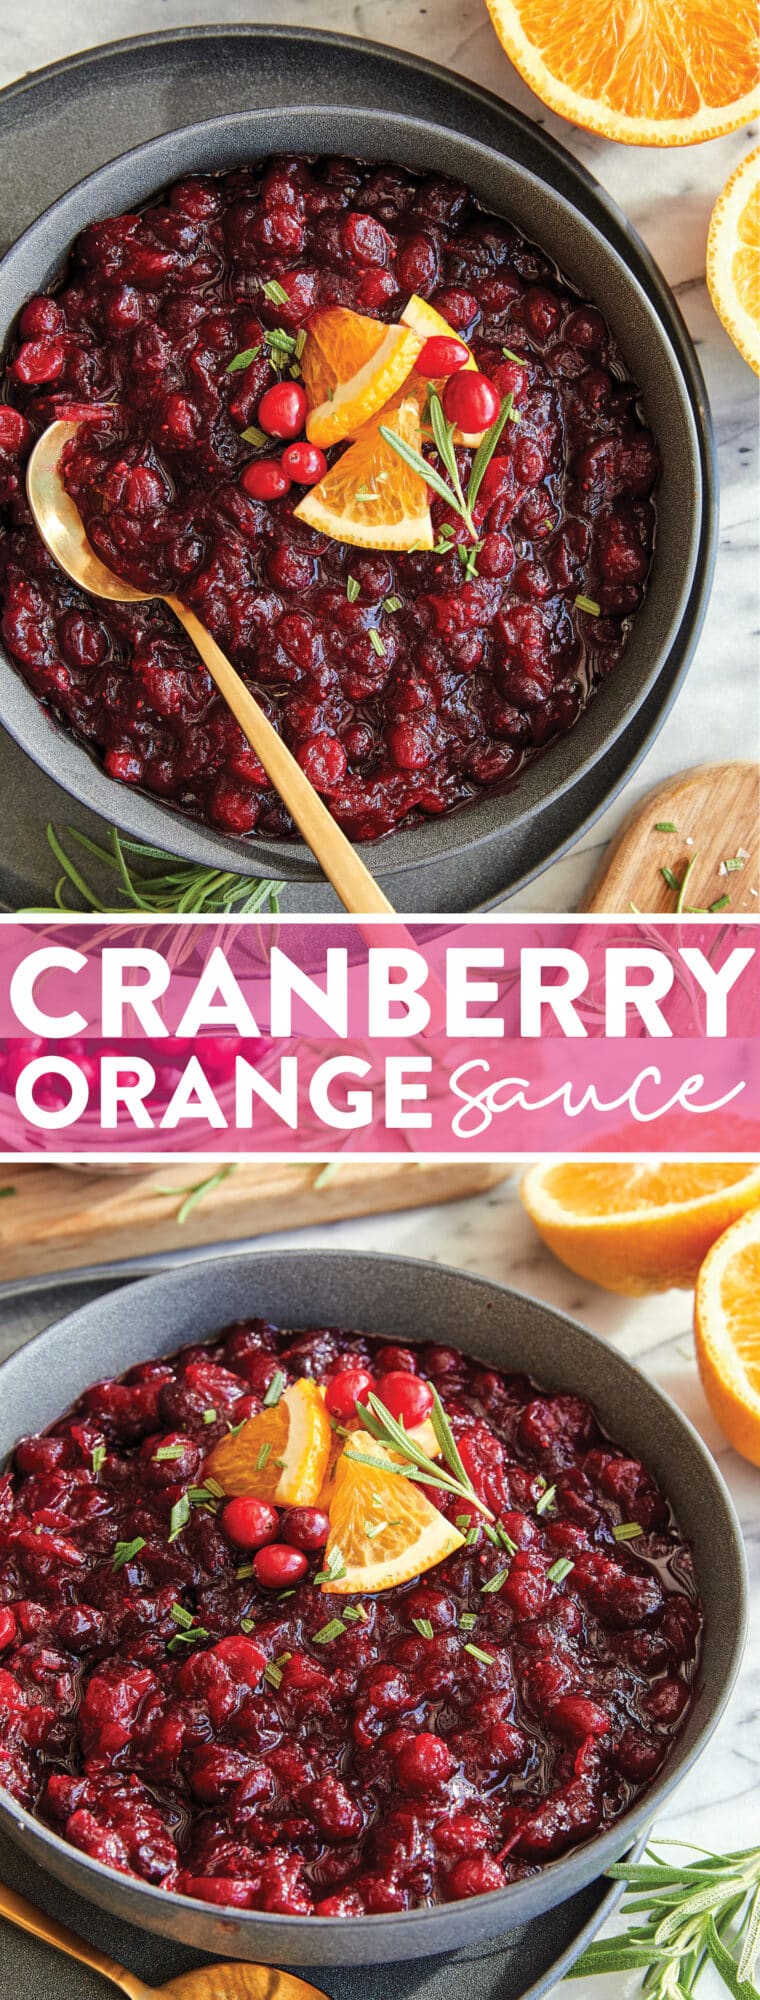 Cranberry Orange Sauce - Skip the canned cranberry sauce and make it right at home. It is embarrassingly easy with just 3 ingredients!